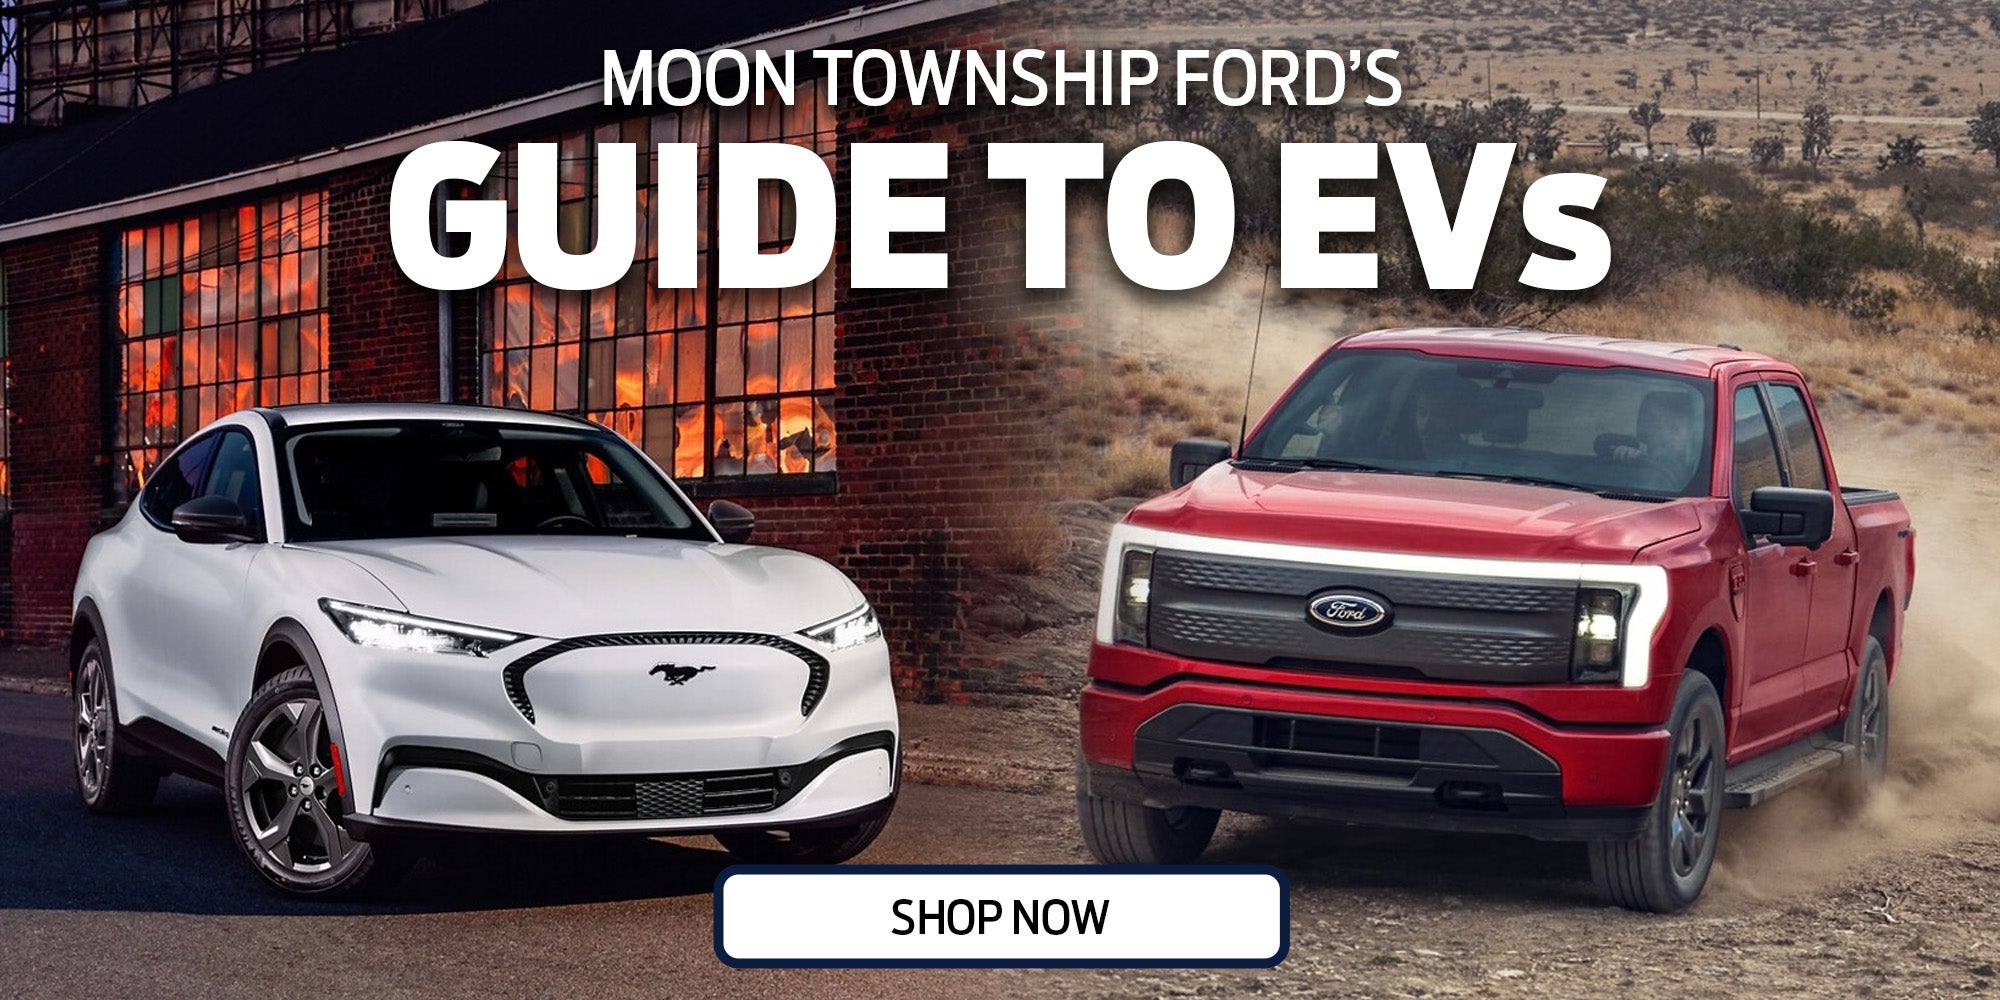 Moon Township Ford’s EV Guide